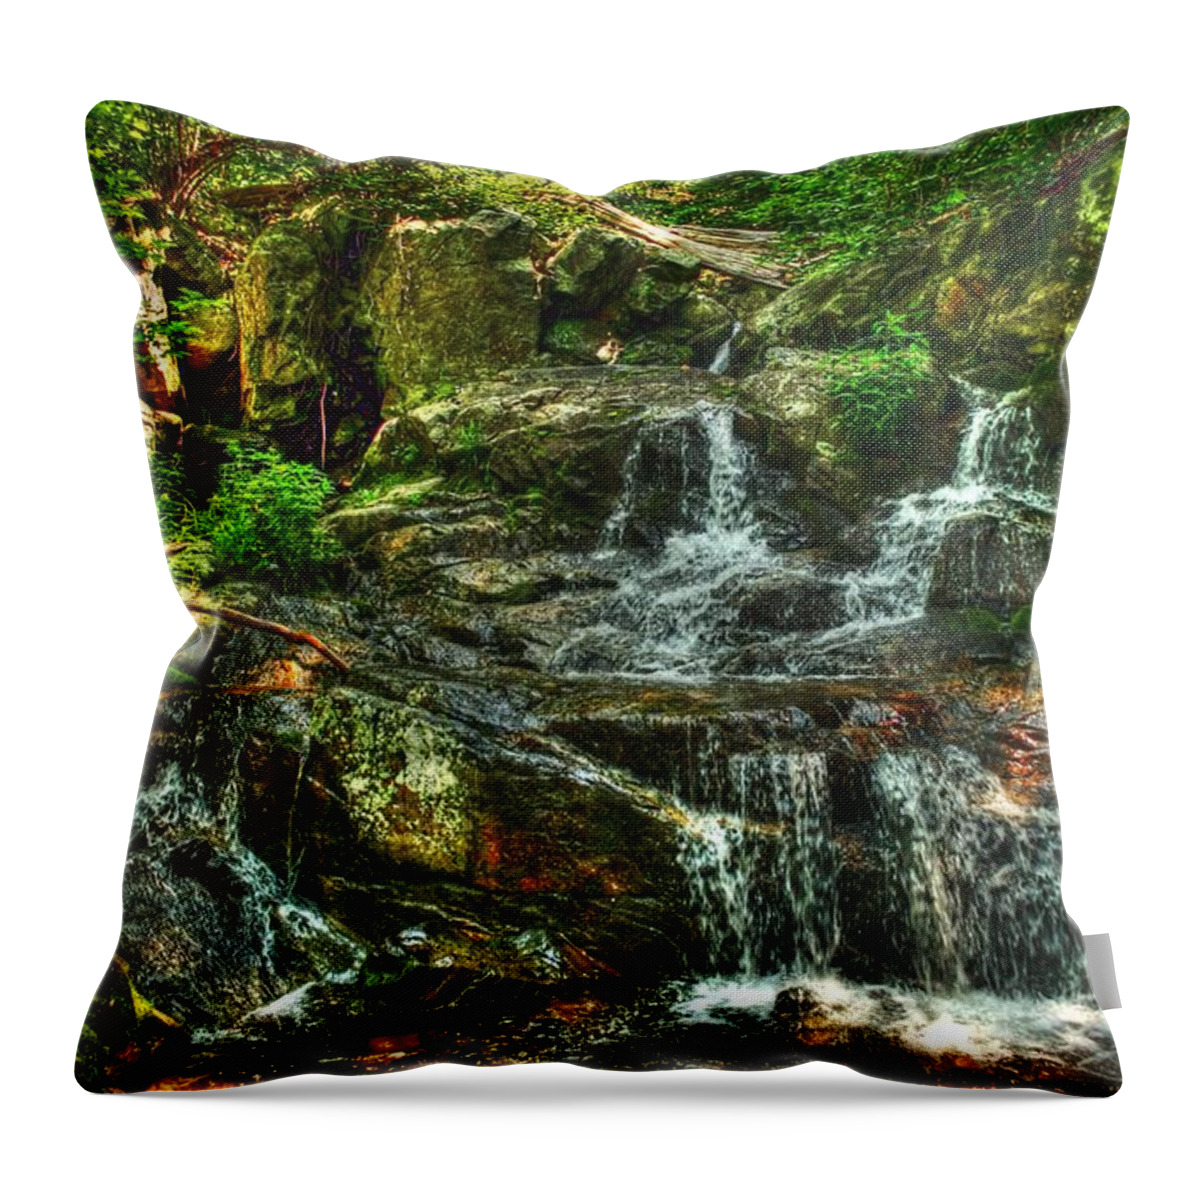 Water Throw Pillow featuring the photograph Gentle Falls by Dan Stone